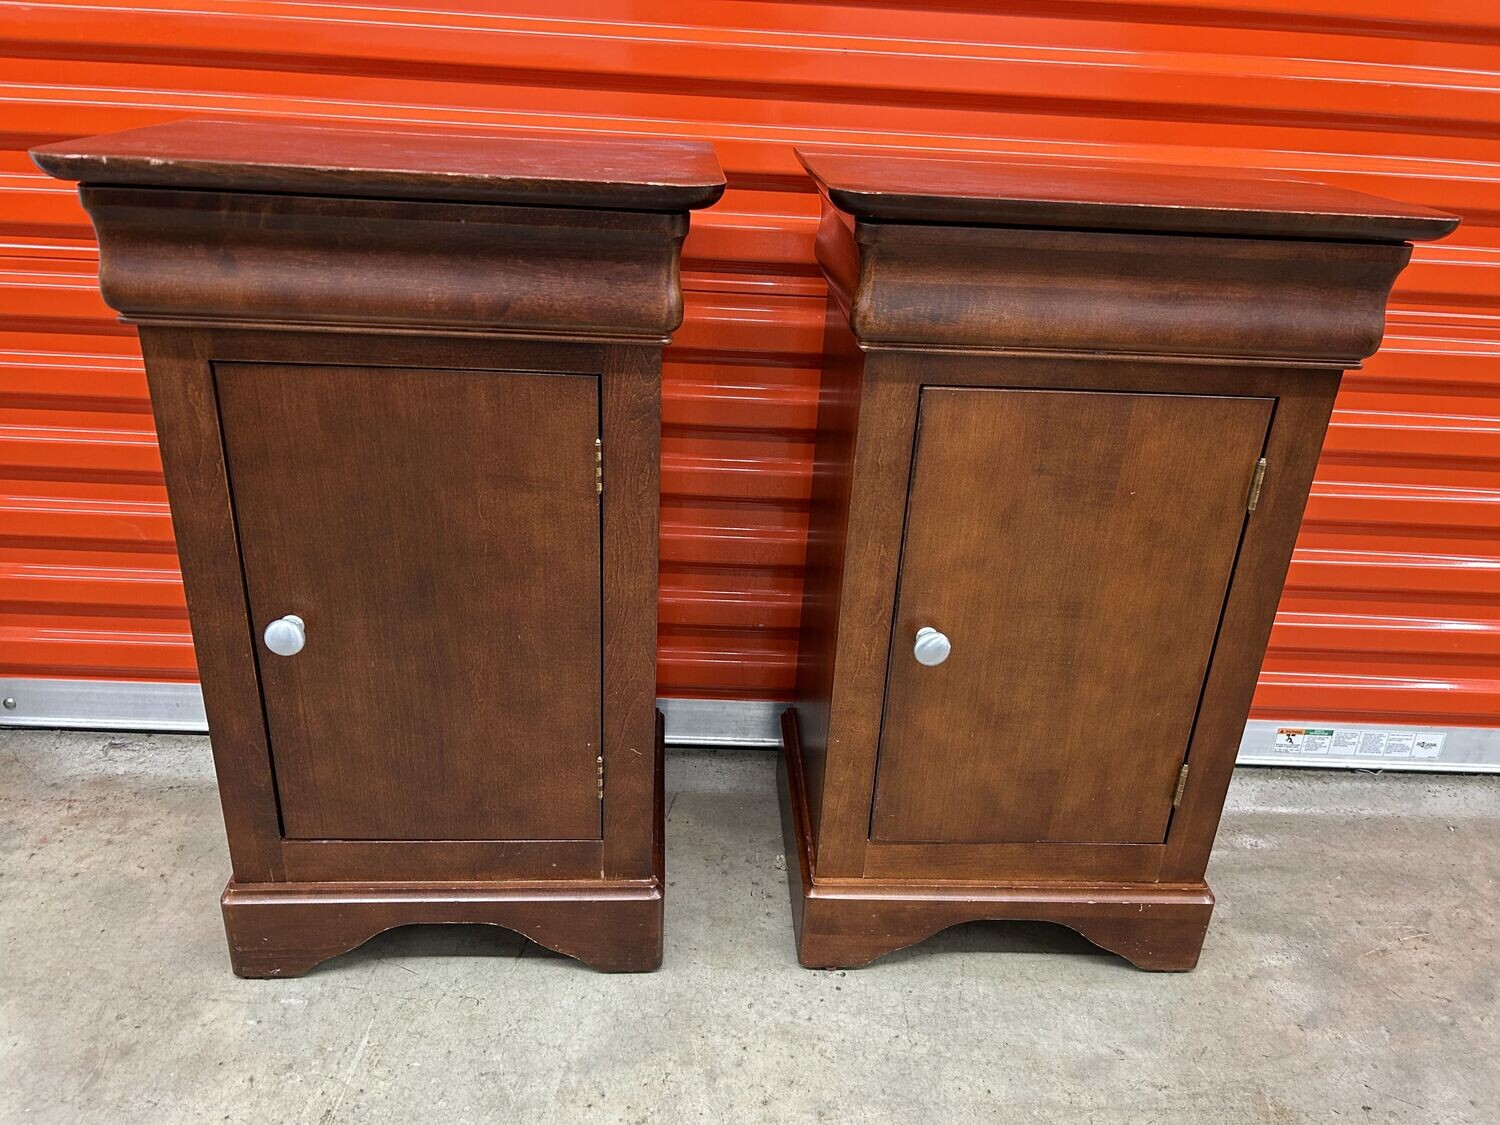 Matching Nightstands, curved top trim #2114 ** 3 days to sell, full price